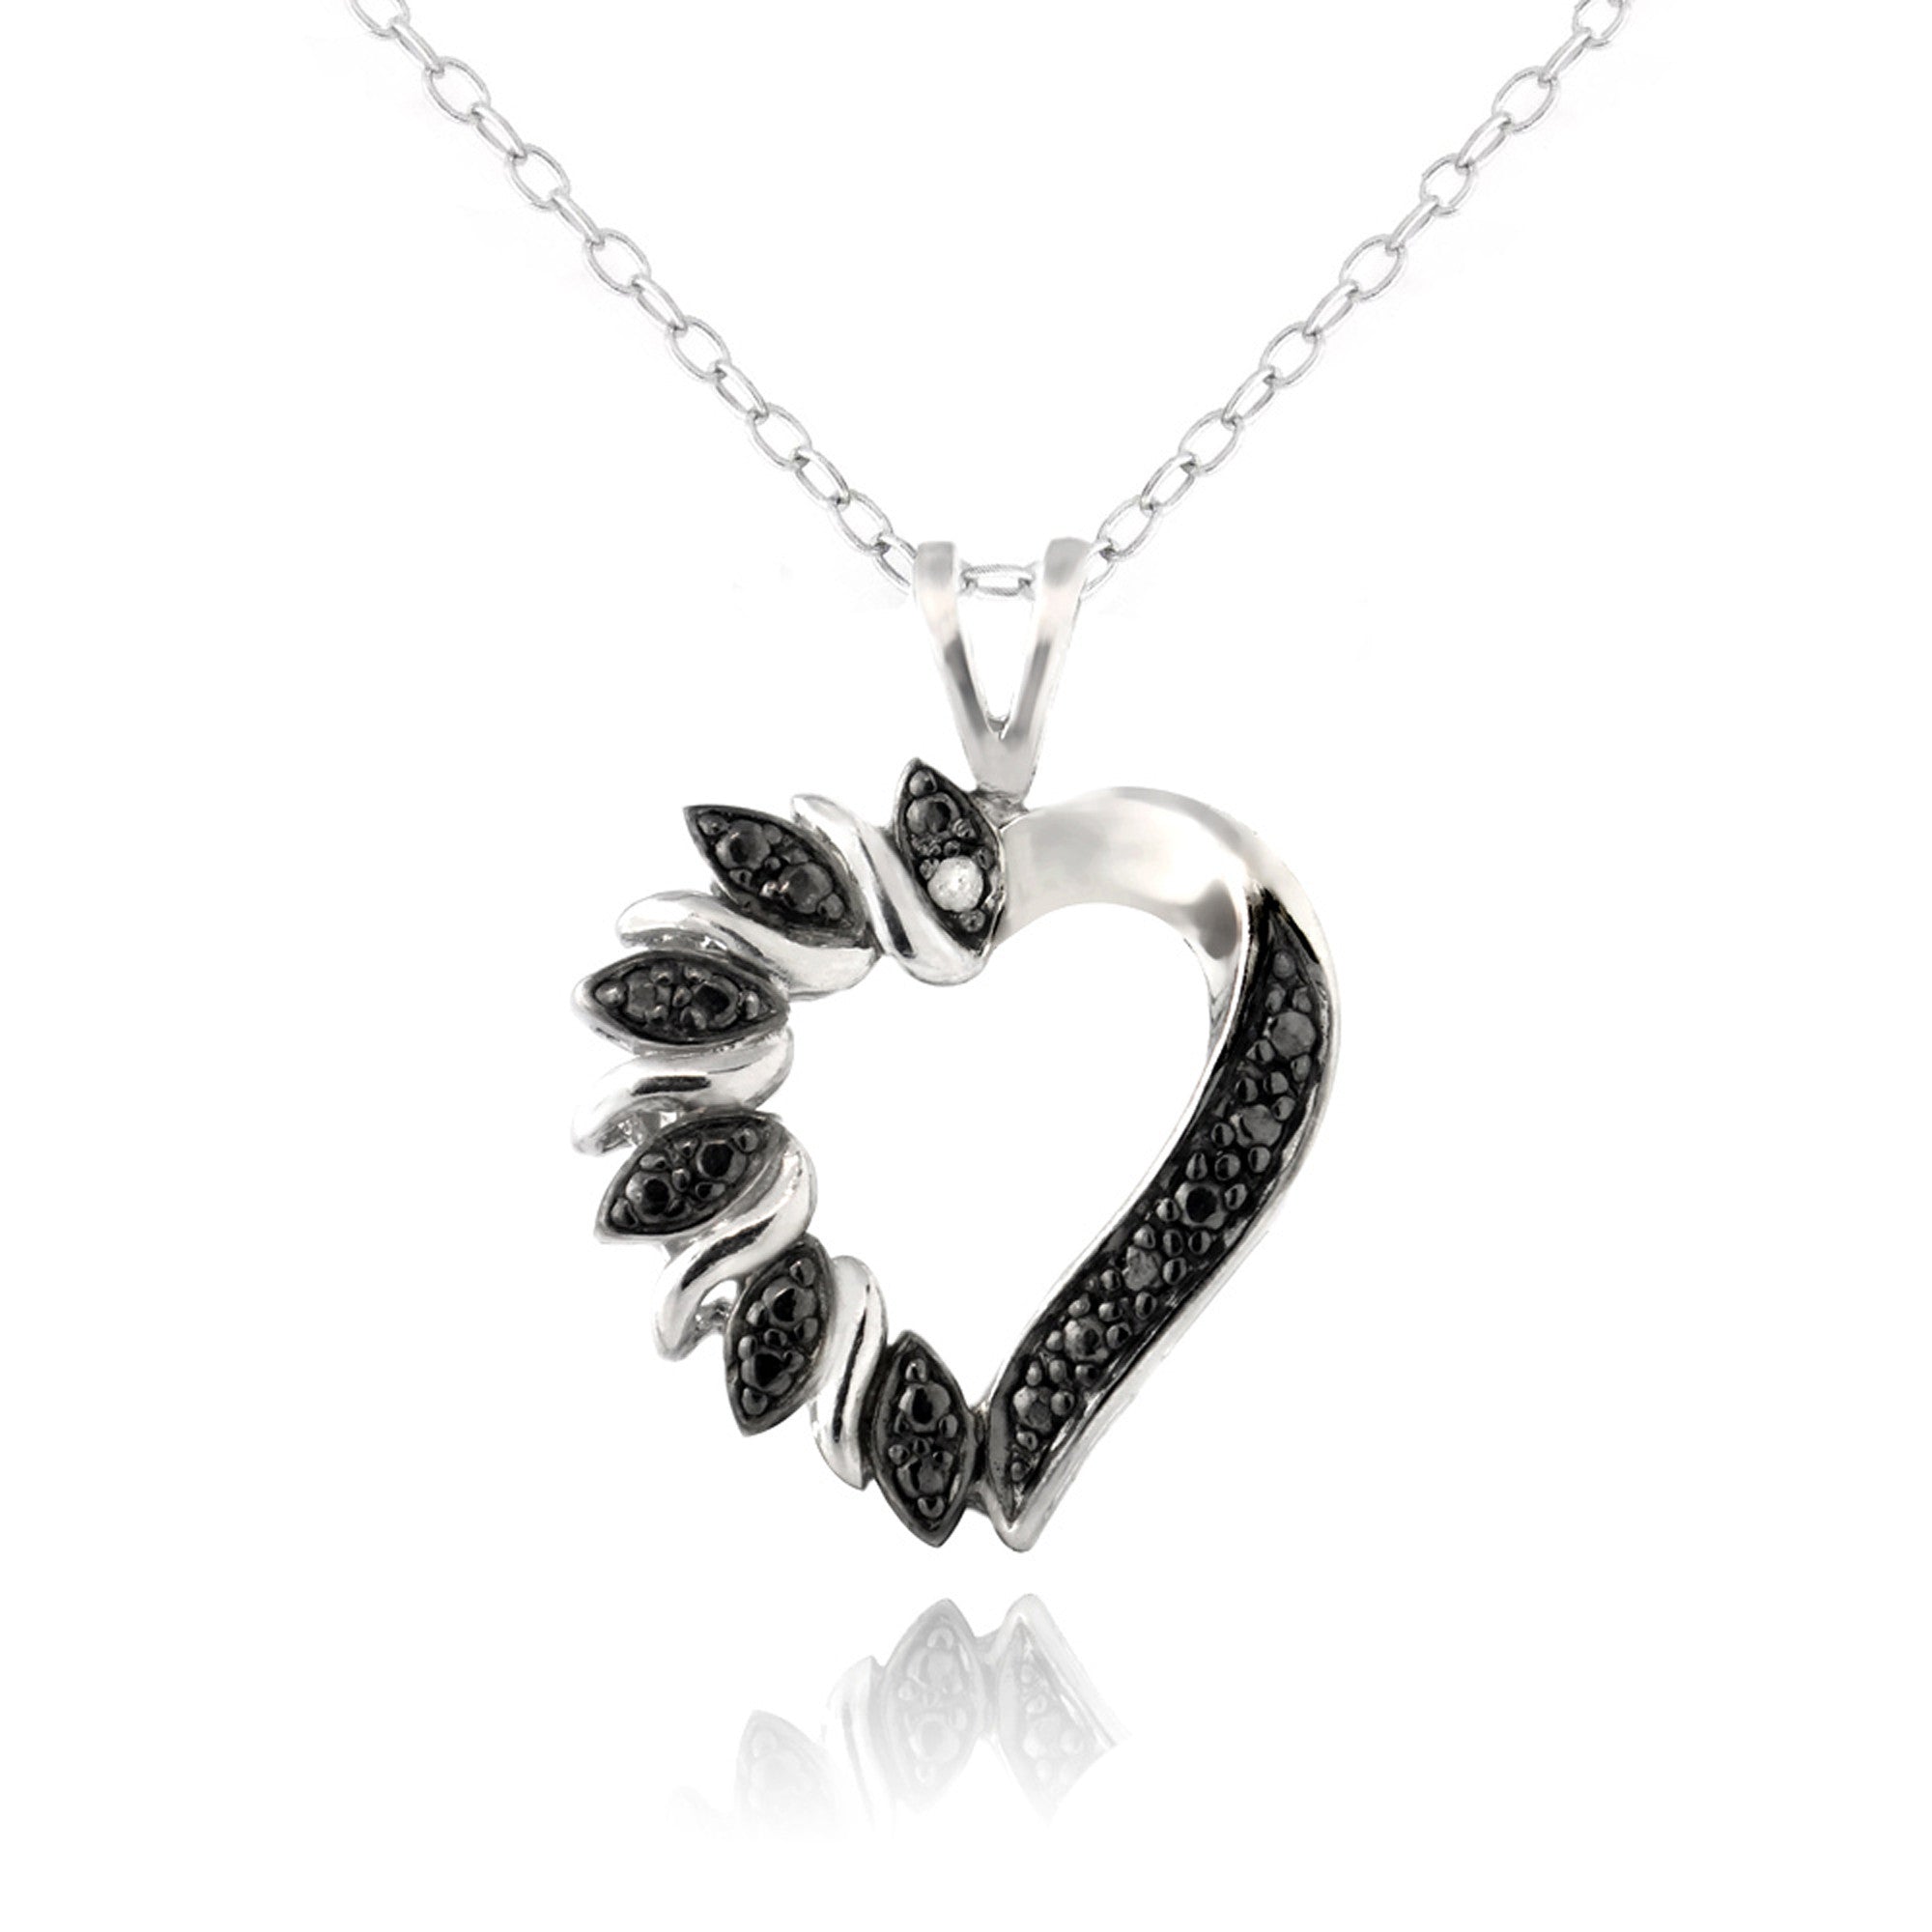 Heart Necklace With Diamond Accents - Black & Silver